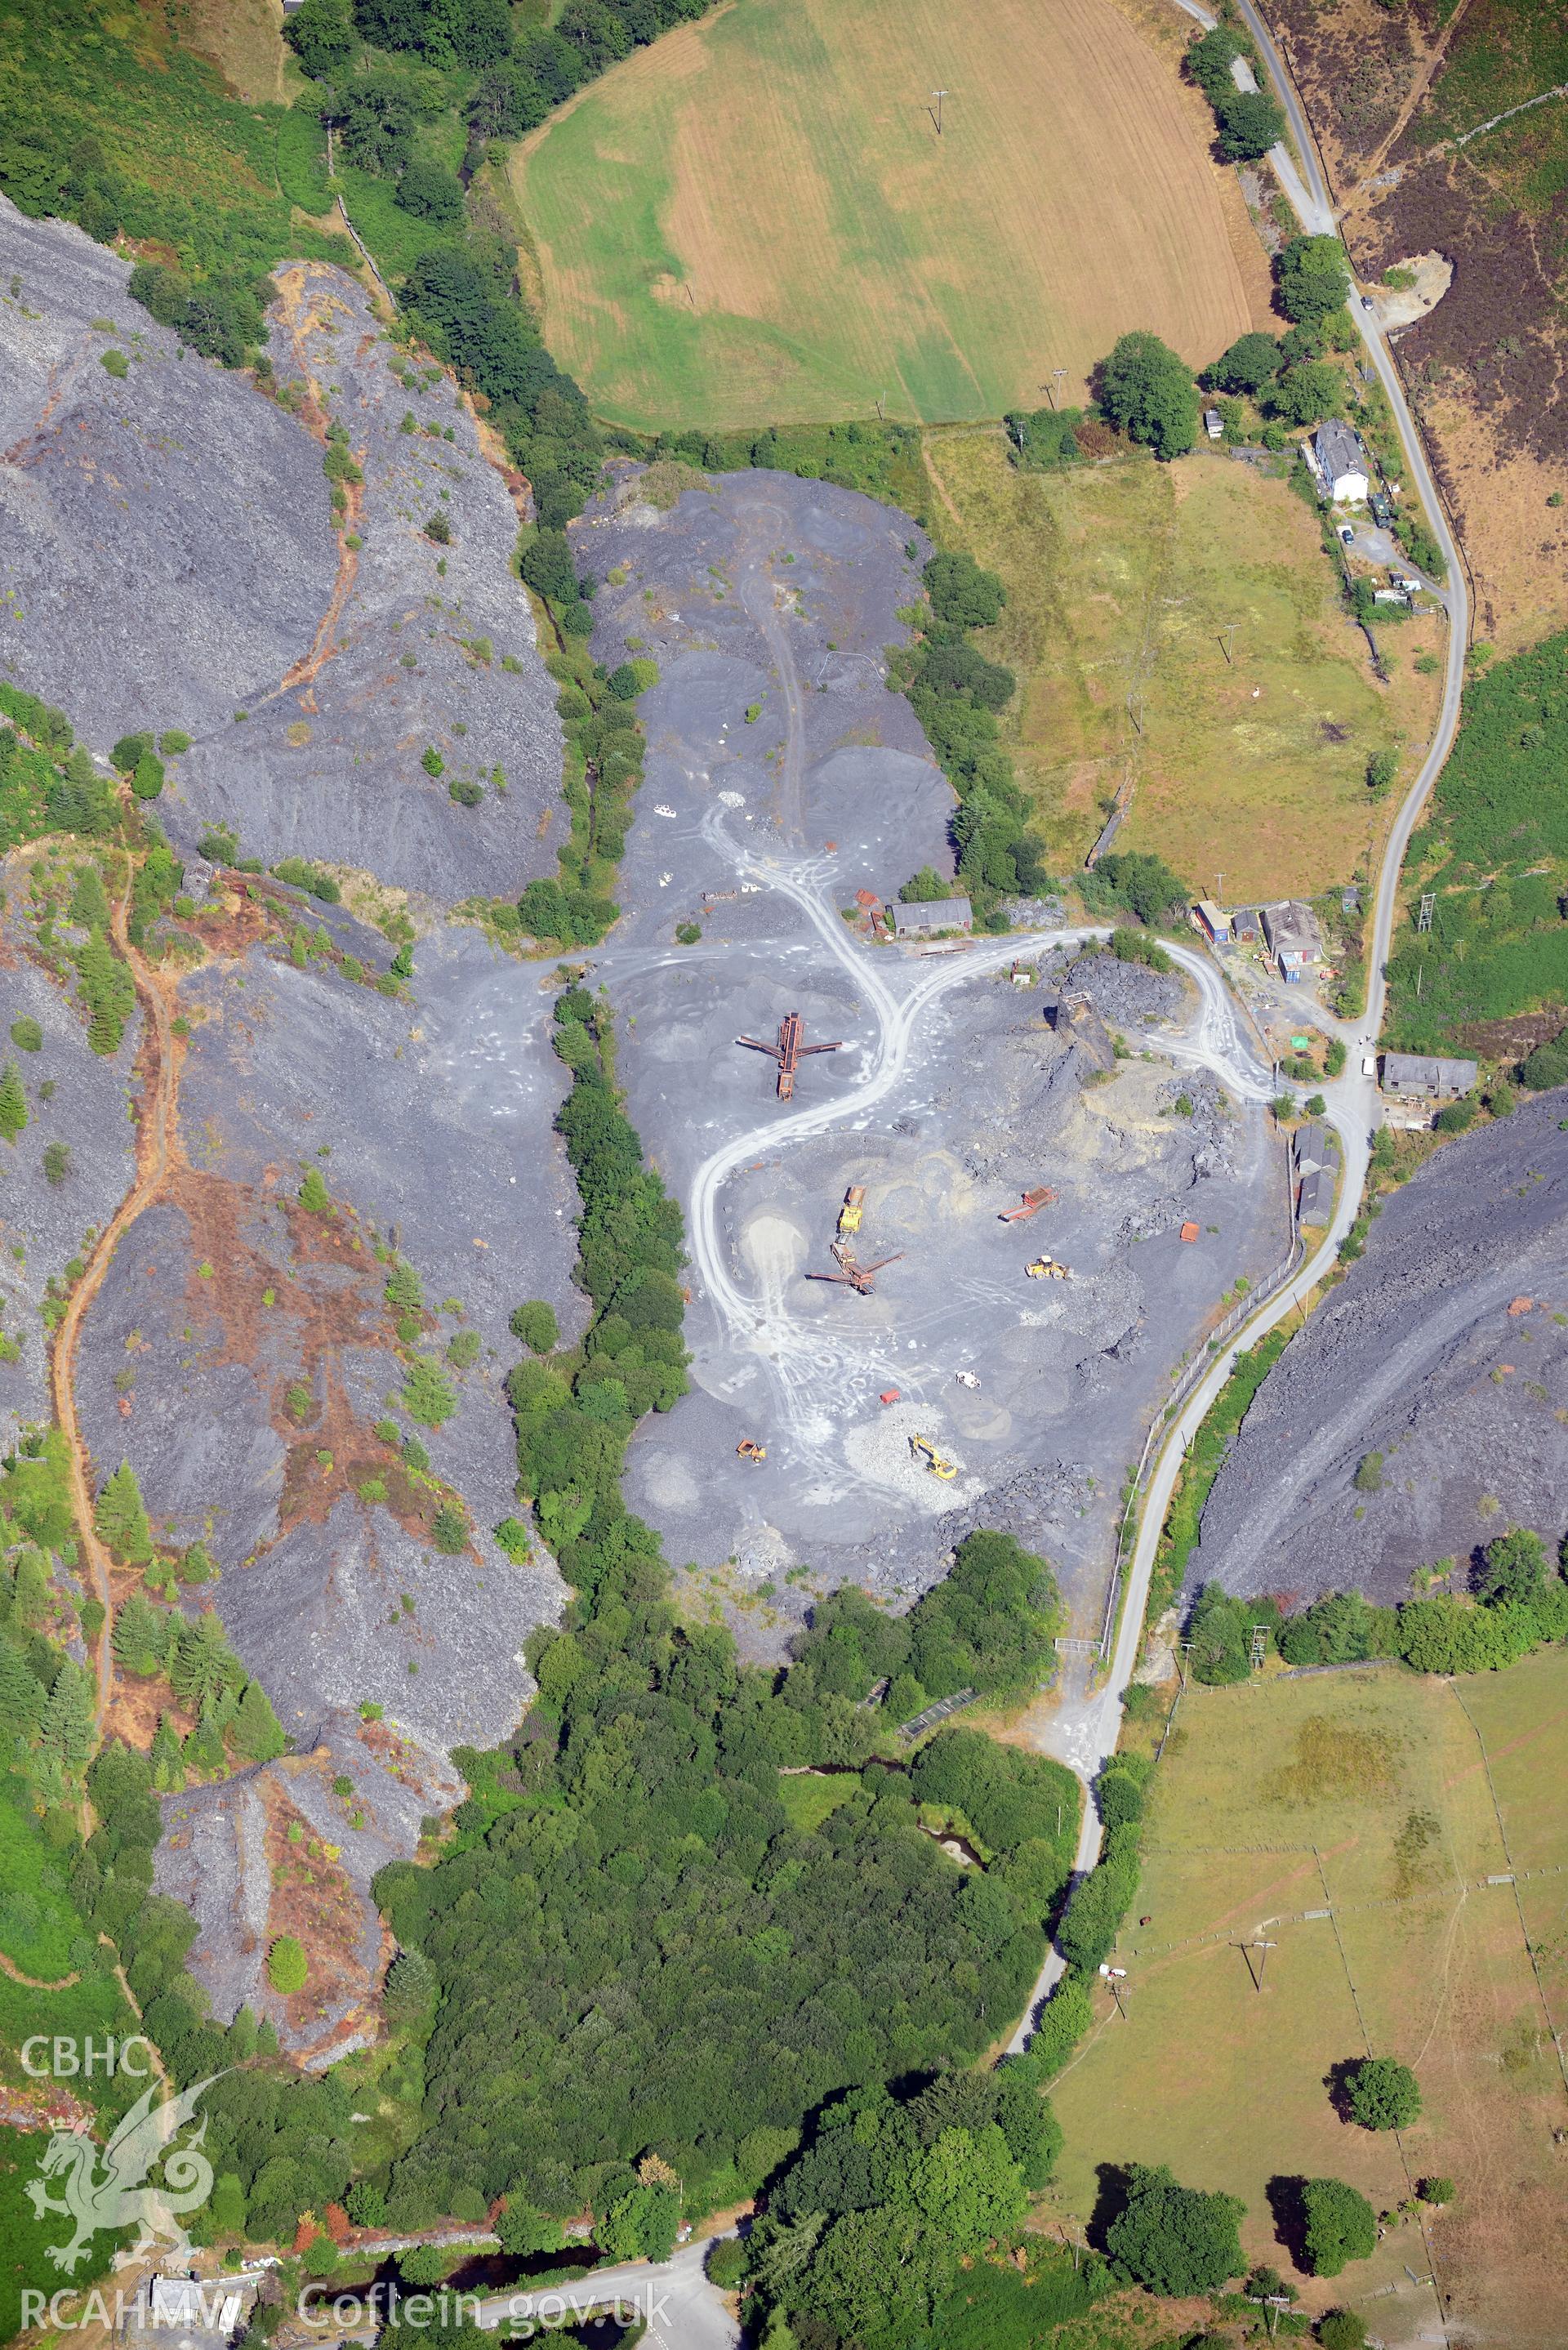 Royal Commission aerial photography of Aberllefenni Slate Quarry and landscape taken on 19th July 2018 during the 2018 drought.